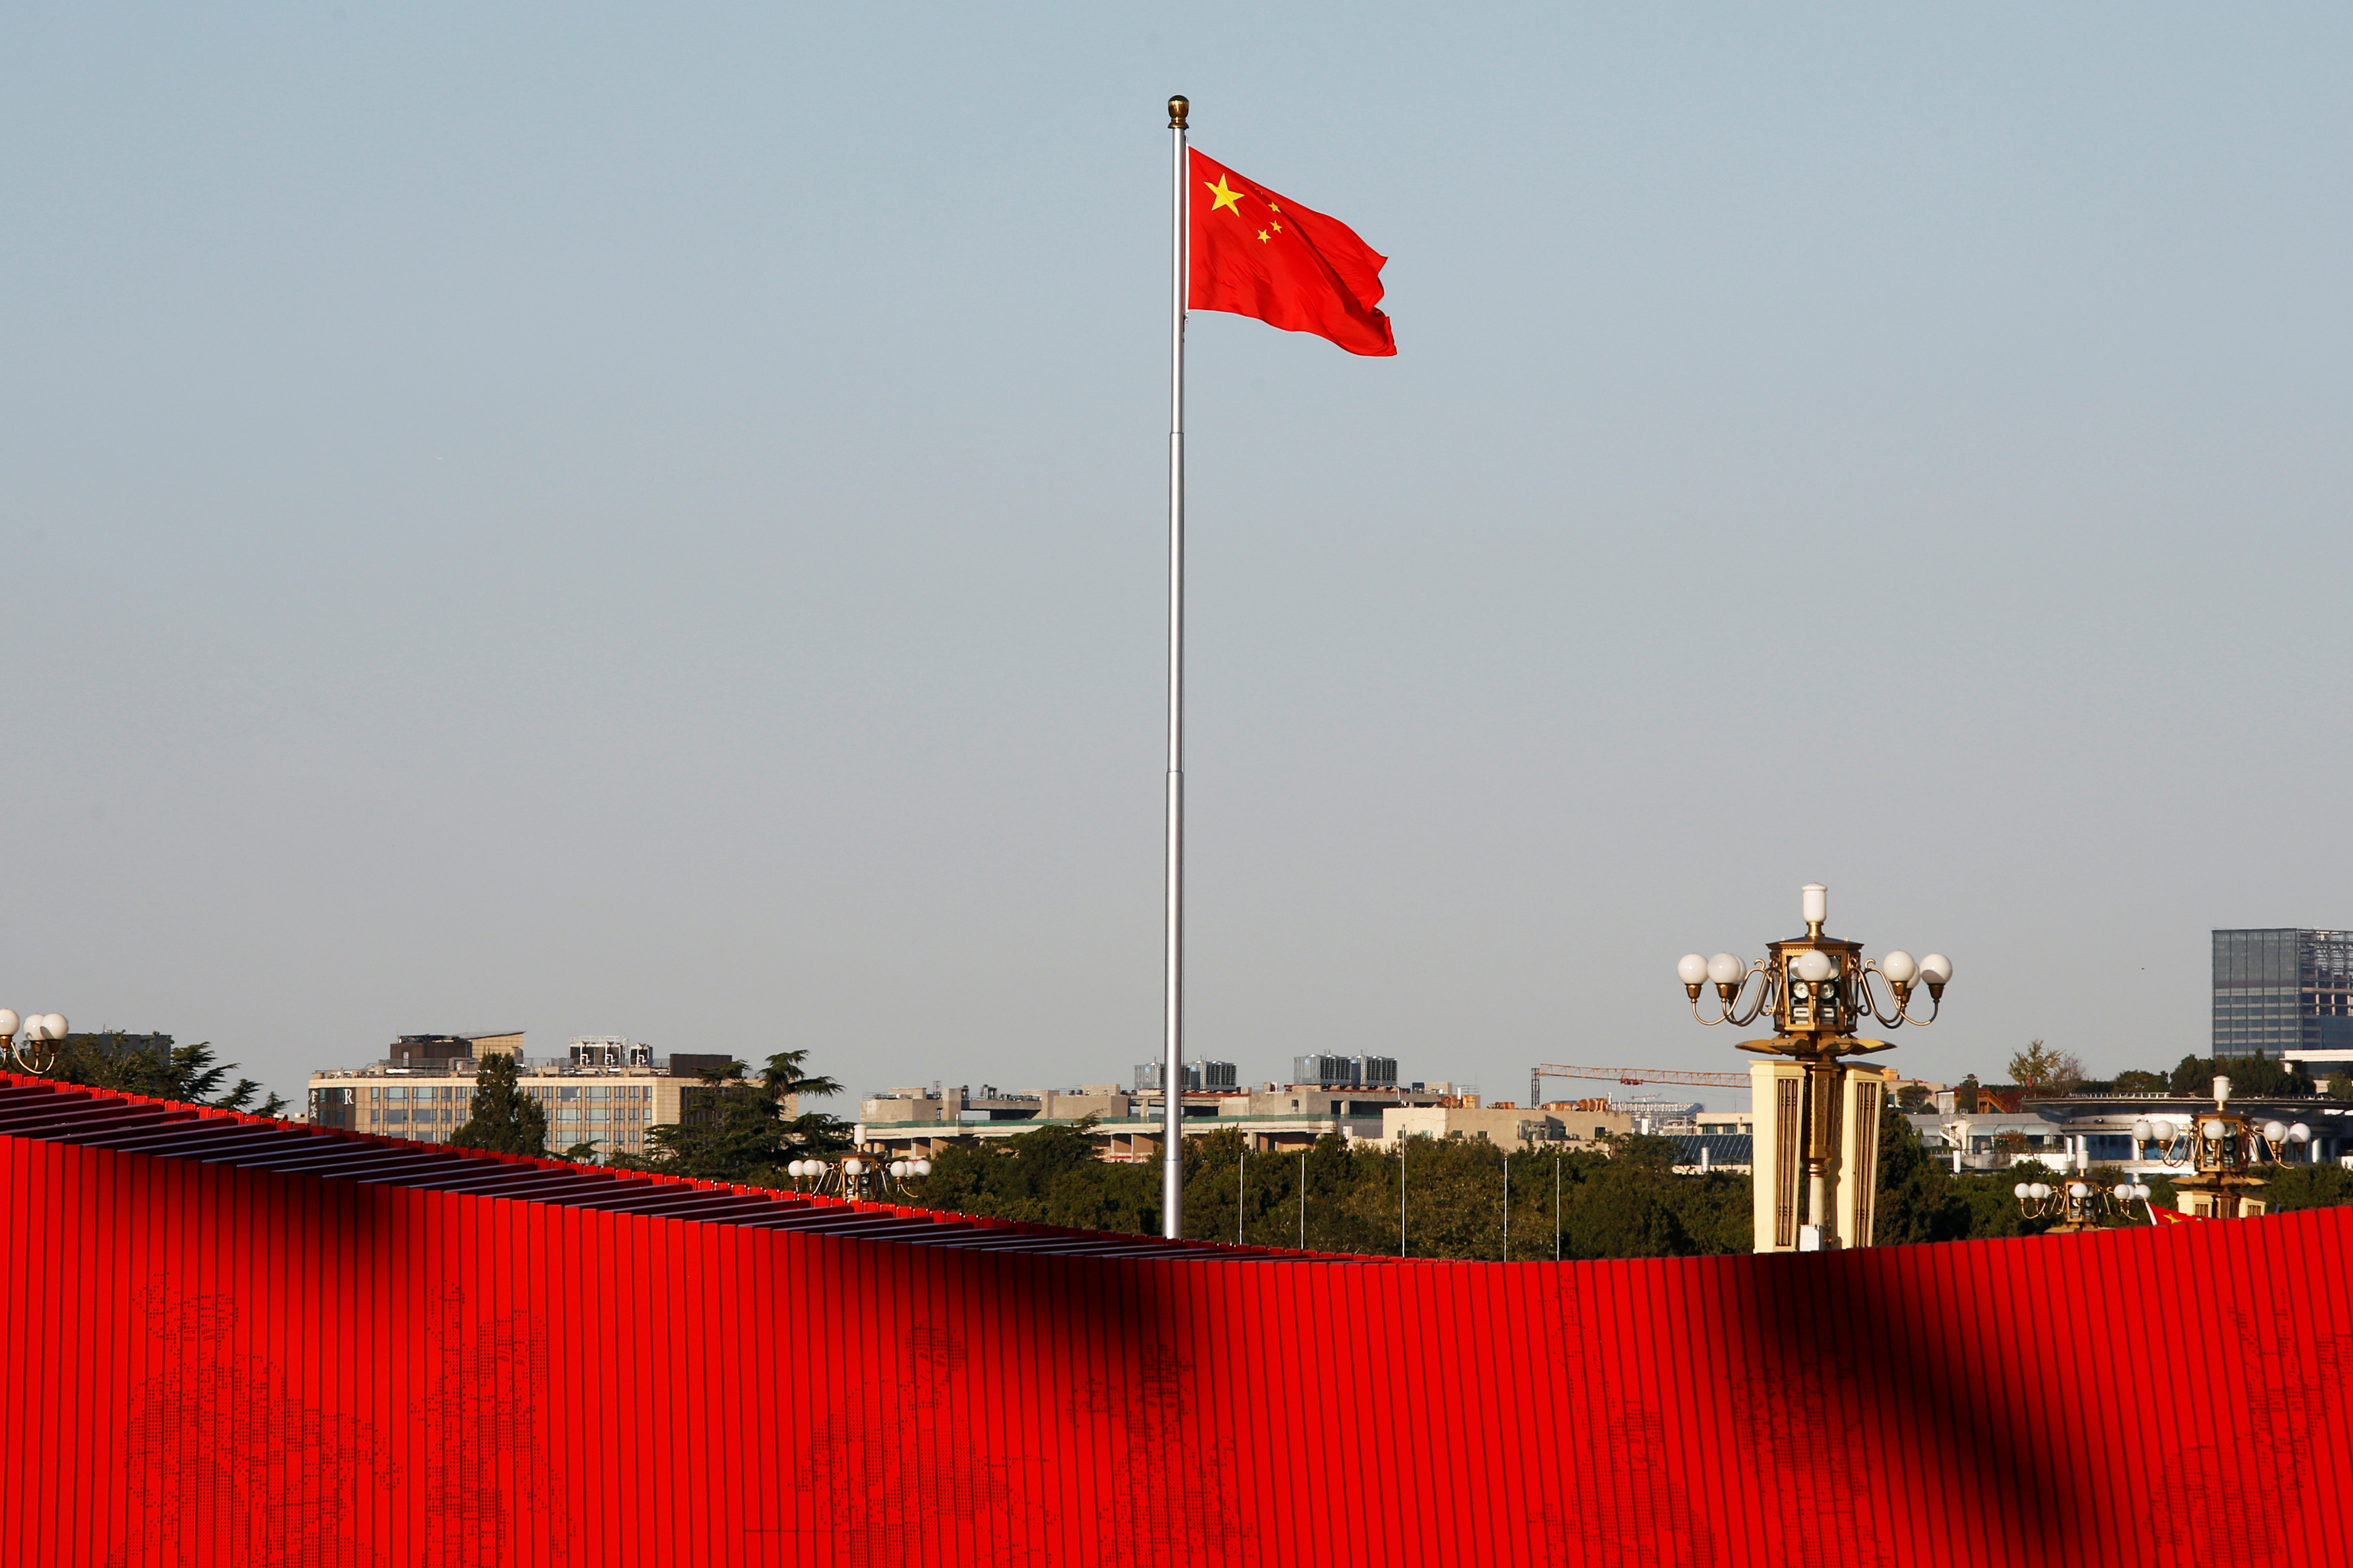 A Chinese flag flutters at the Tiananmen Square in Beijing, China October 25, 2019.  REUTERS/Florence Lo